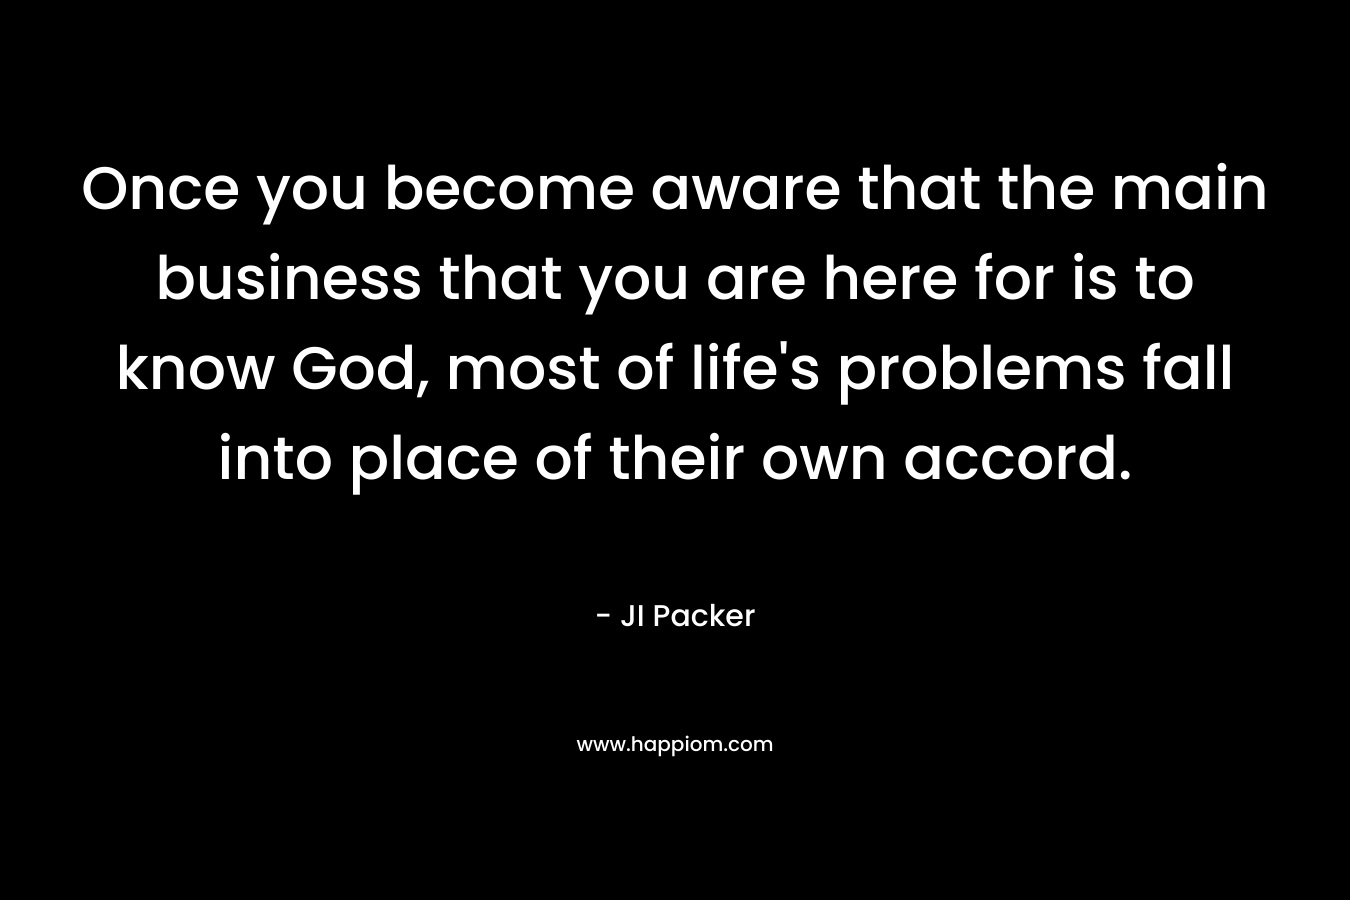 Once you become aware that the main business that you are here for is to know God, most of life’s problems fall into place of their own accord. – JI Packer